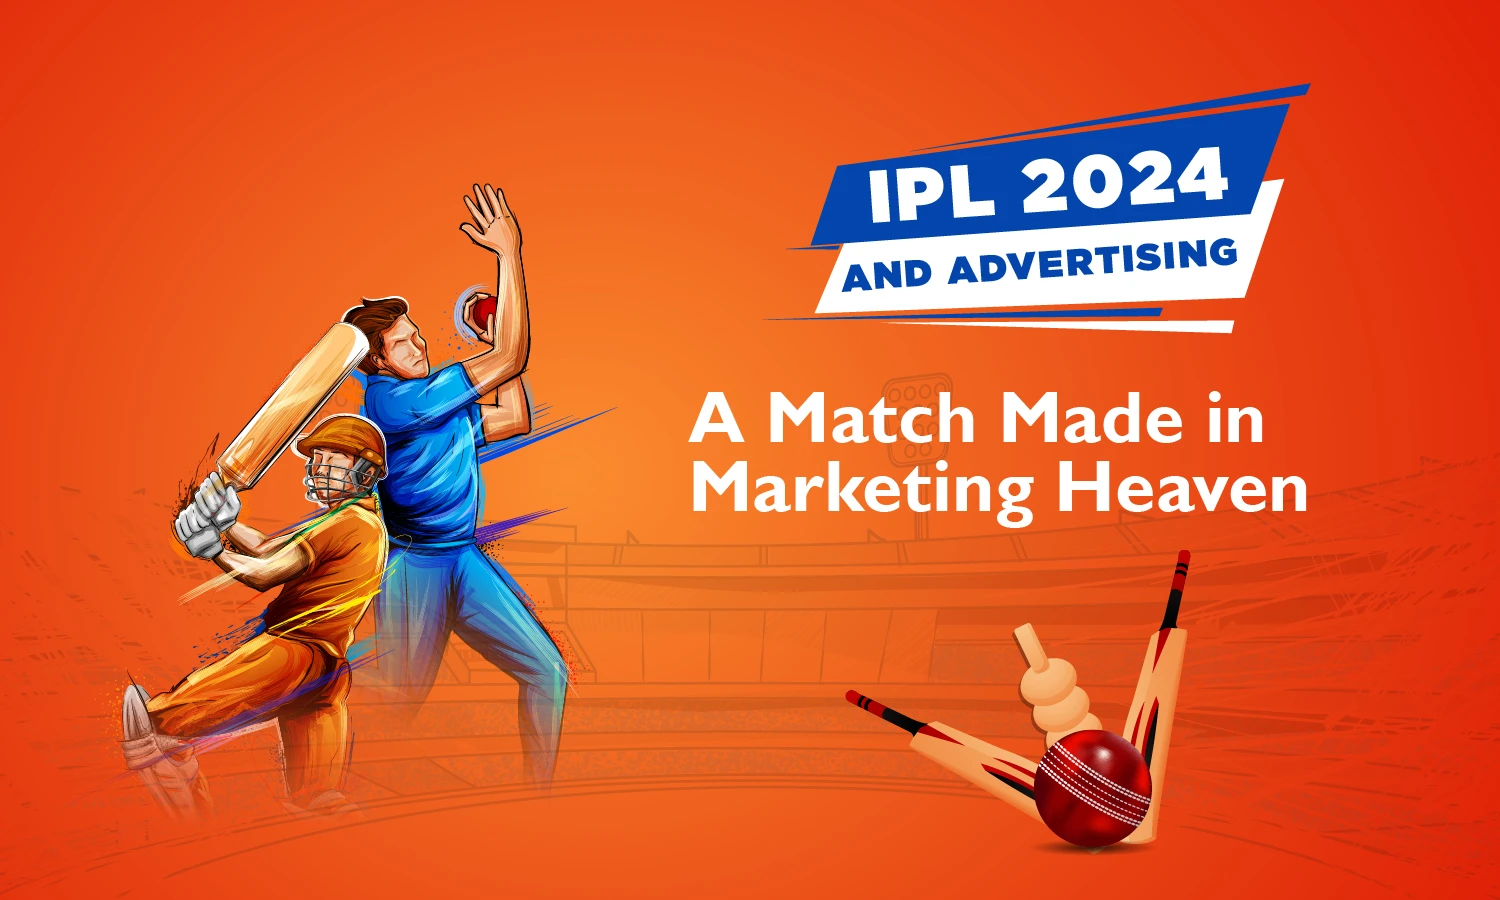 IPL 2024 and Advertising: A Match Made in Marketing Heaven